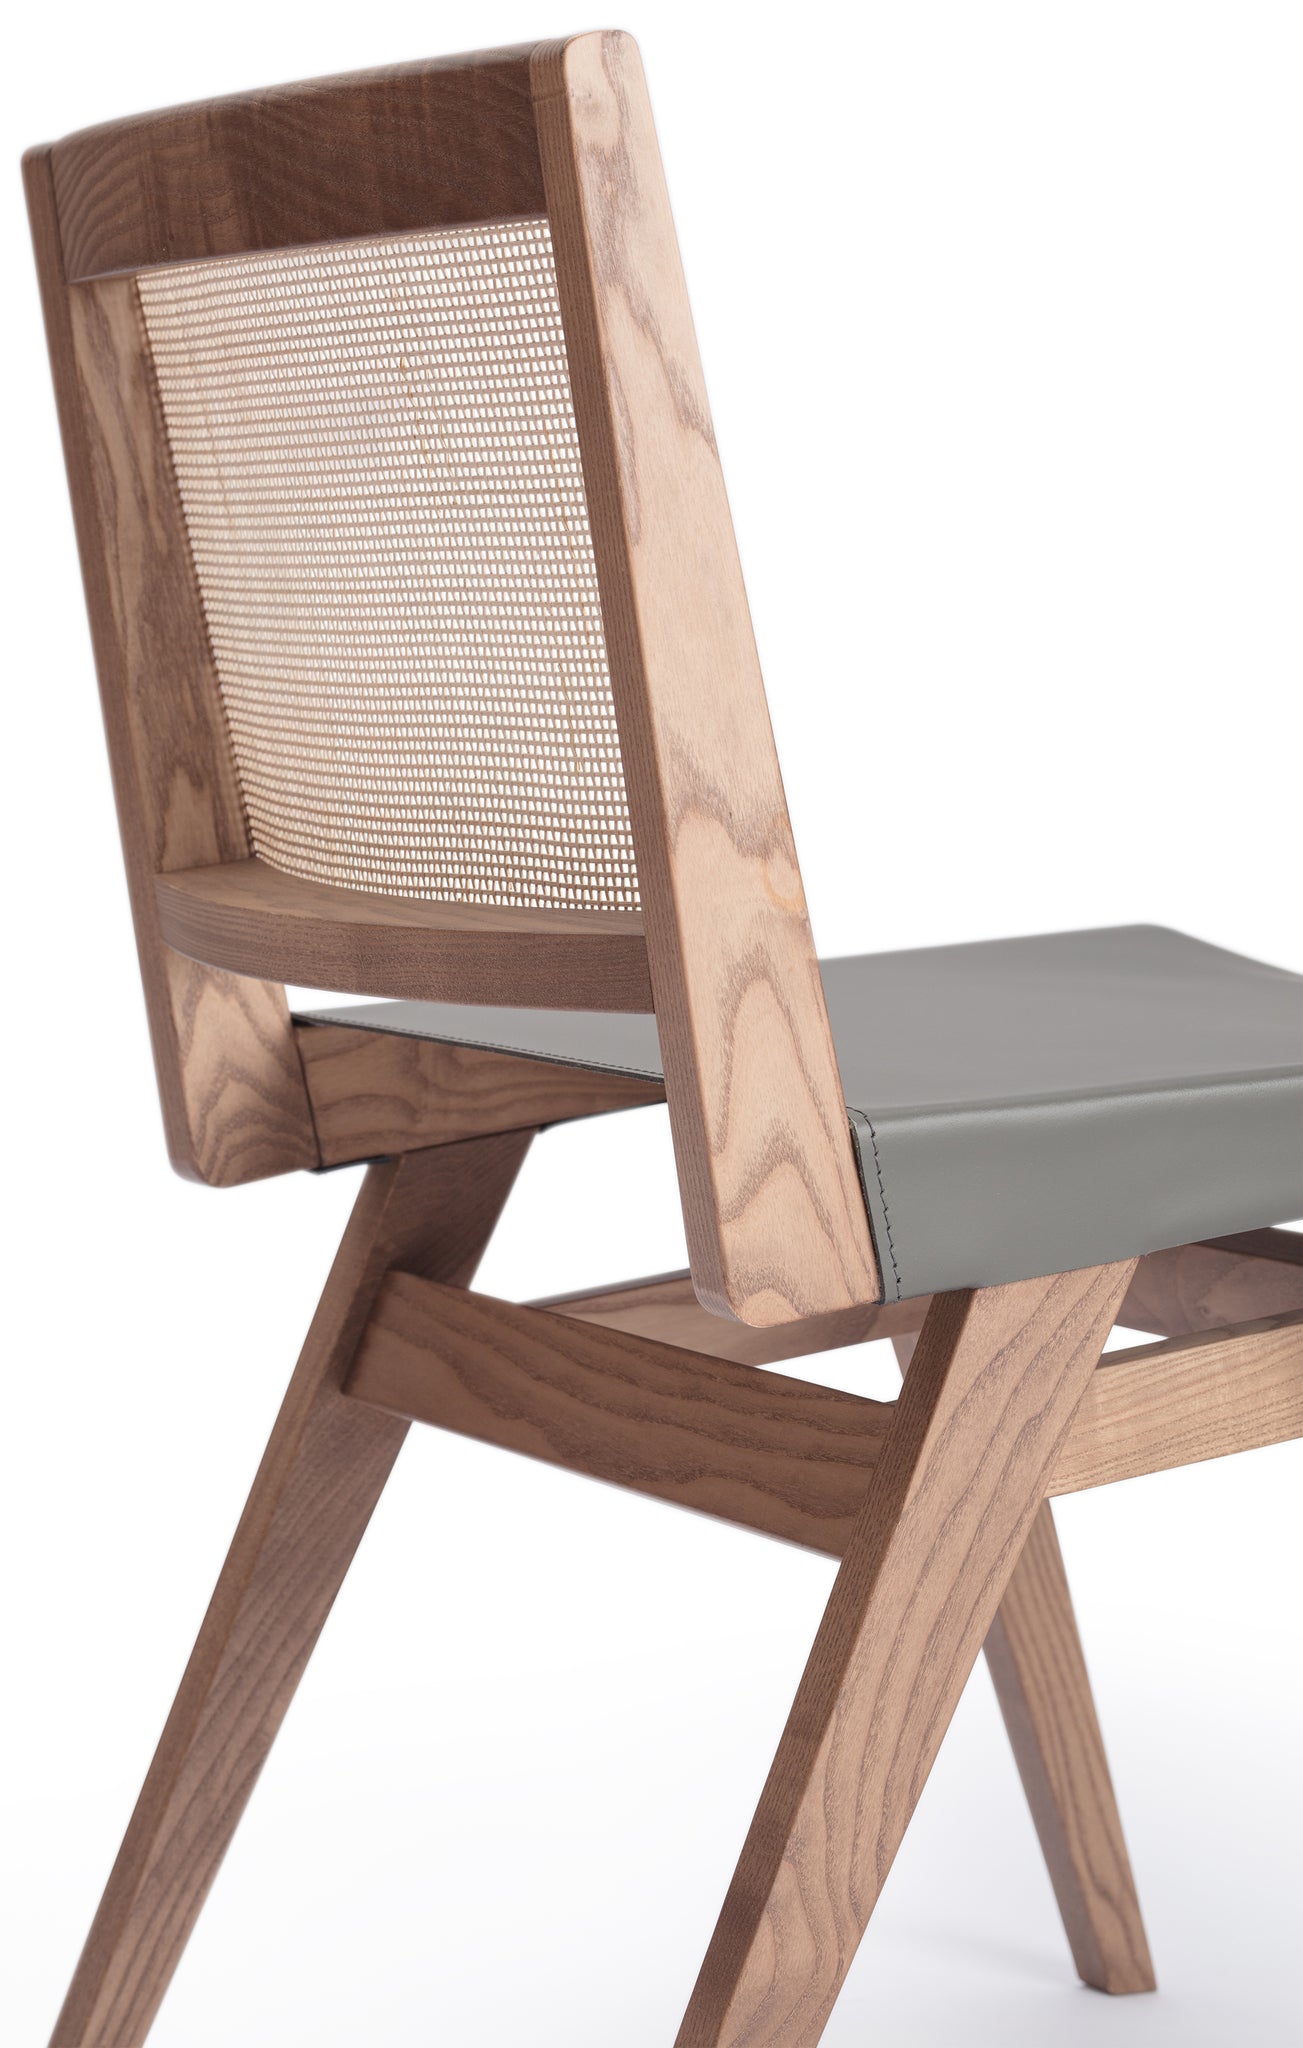 Close-up 2 of an "Elye" modern dining chair, walnut stained ash frame, square weave cane back, contract grade off white leather seat, produced by Klarel in Italy. #K41-2